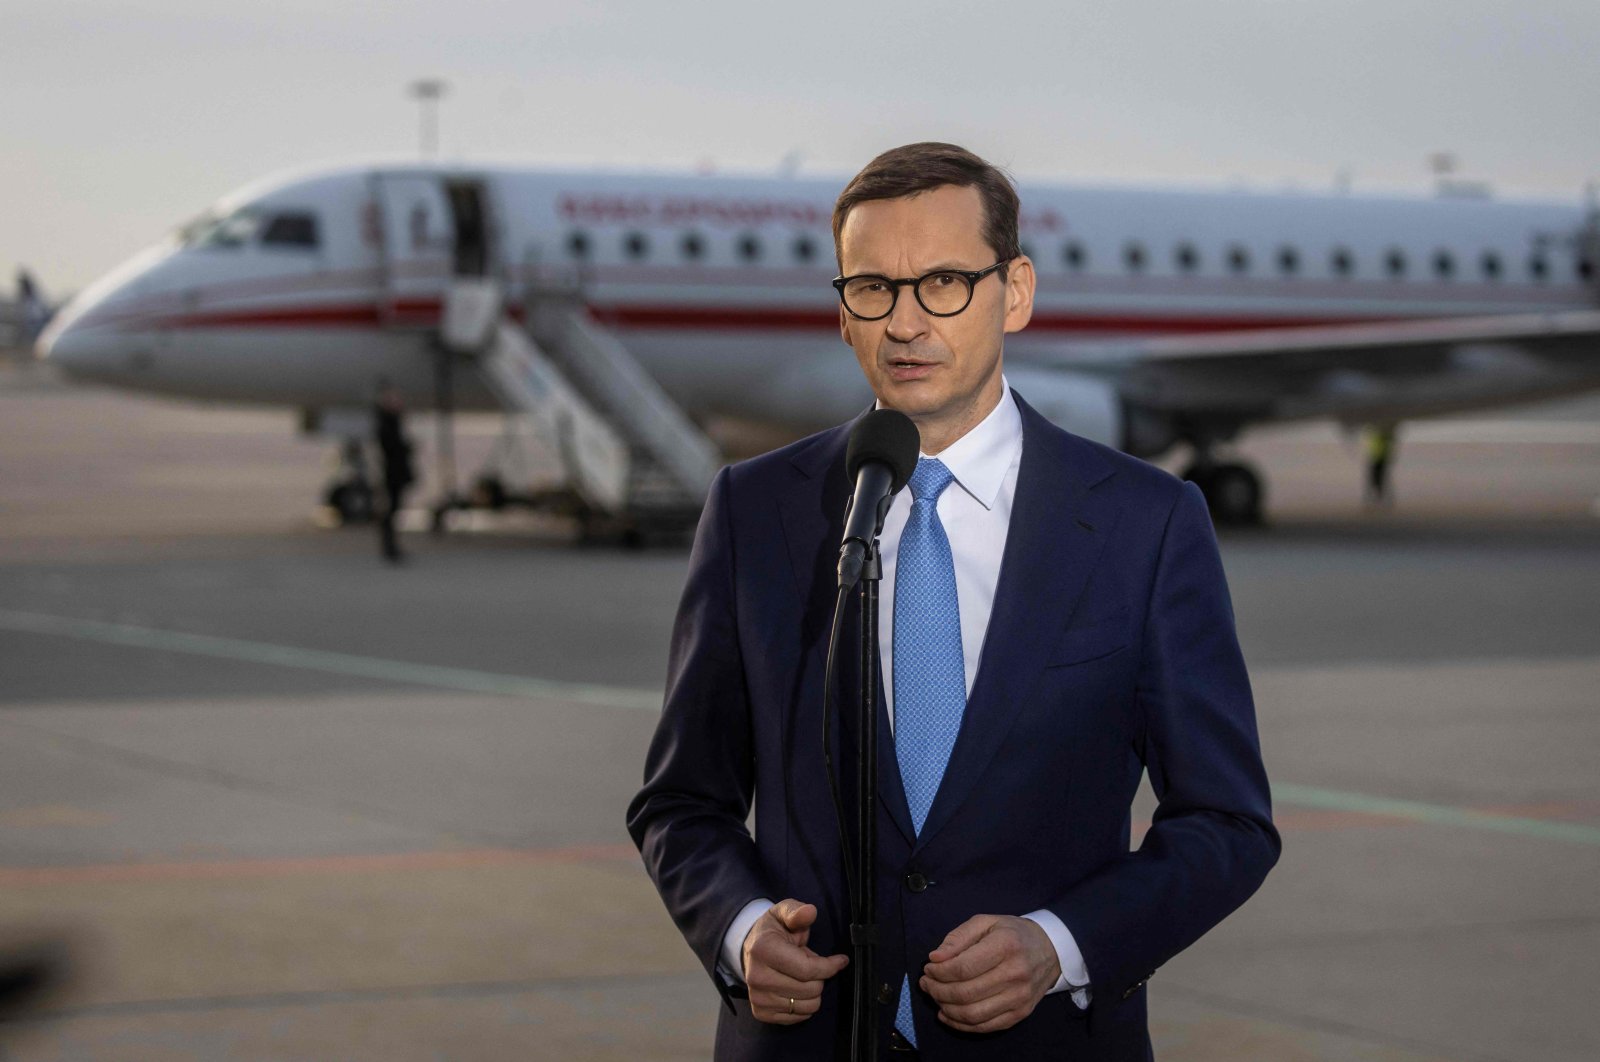 Polish Prime Minister Mateusz Morawiecki speaks to journalists at Warsaw Airport before leaving for Brussels for an emergency EU summit on the Russian invasion of Ukraine, Poland, Feb. 24, 2022. (AFP Photo)